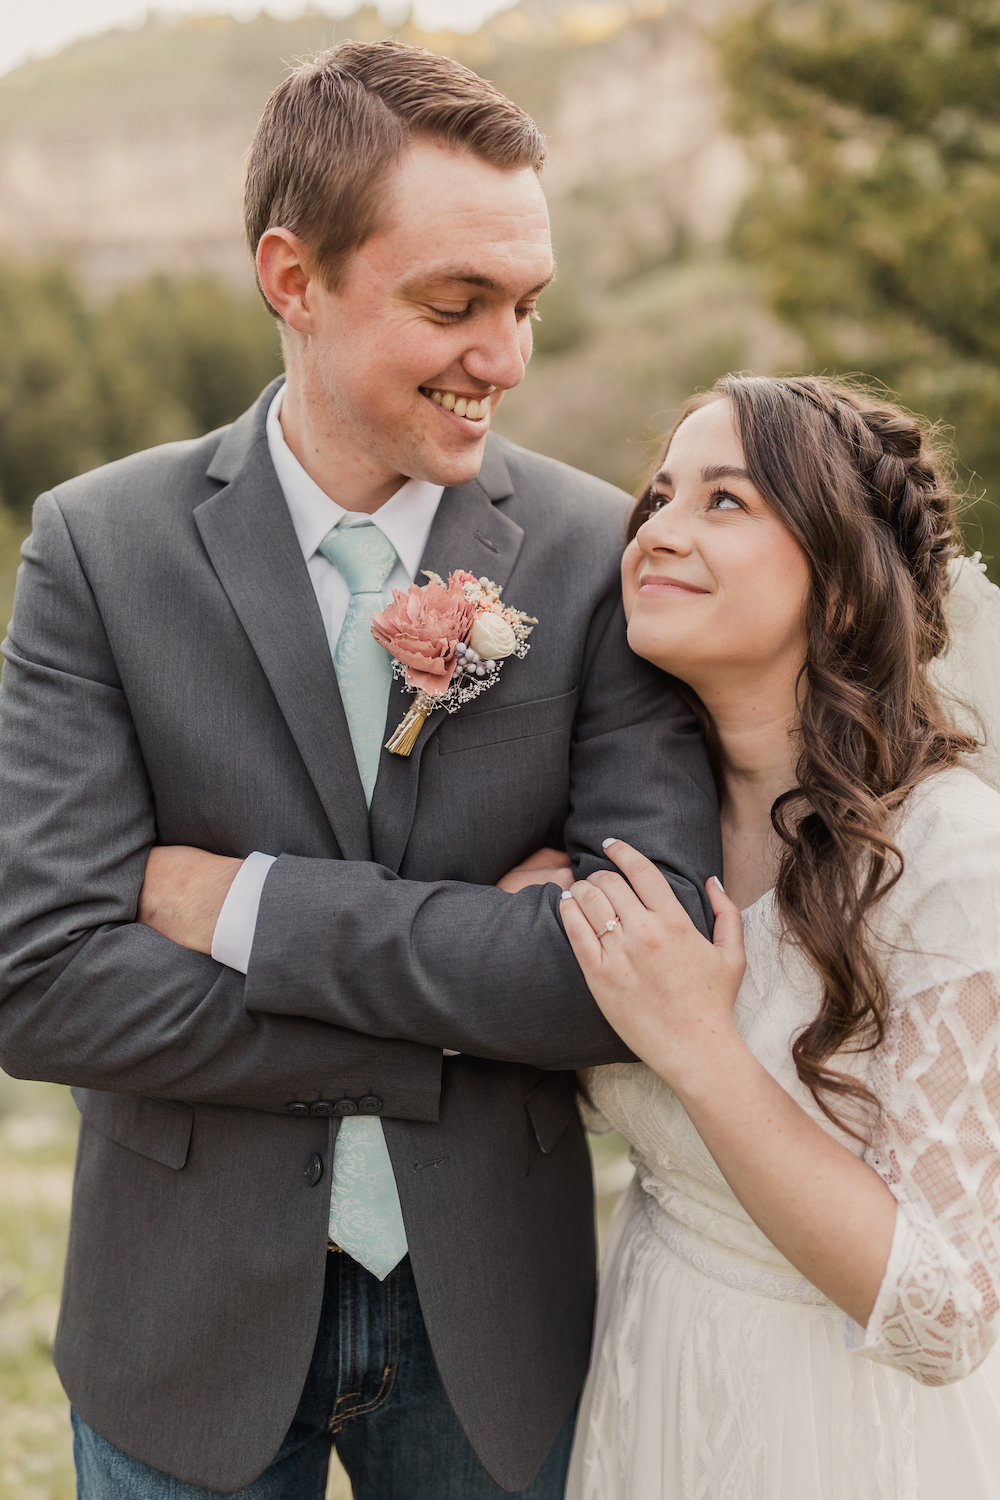 Getting Comfortable In Front of the Camera For Your Wedding Day: Bride rests her head against groom's shoulder as they smile at each other.